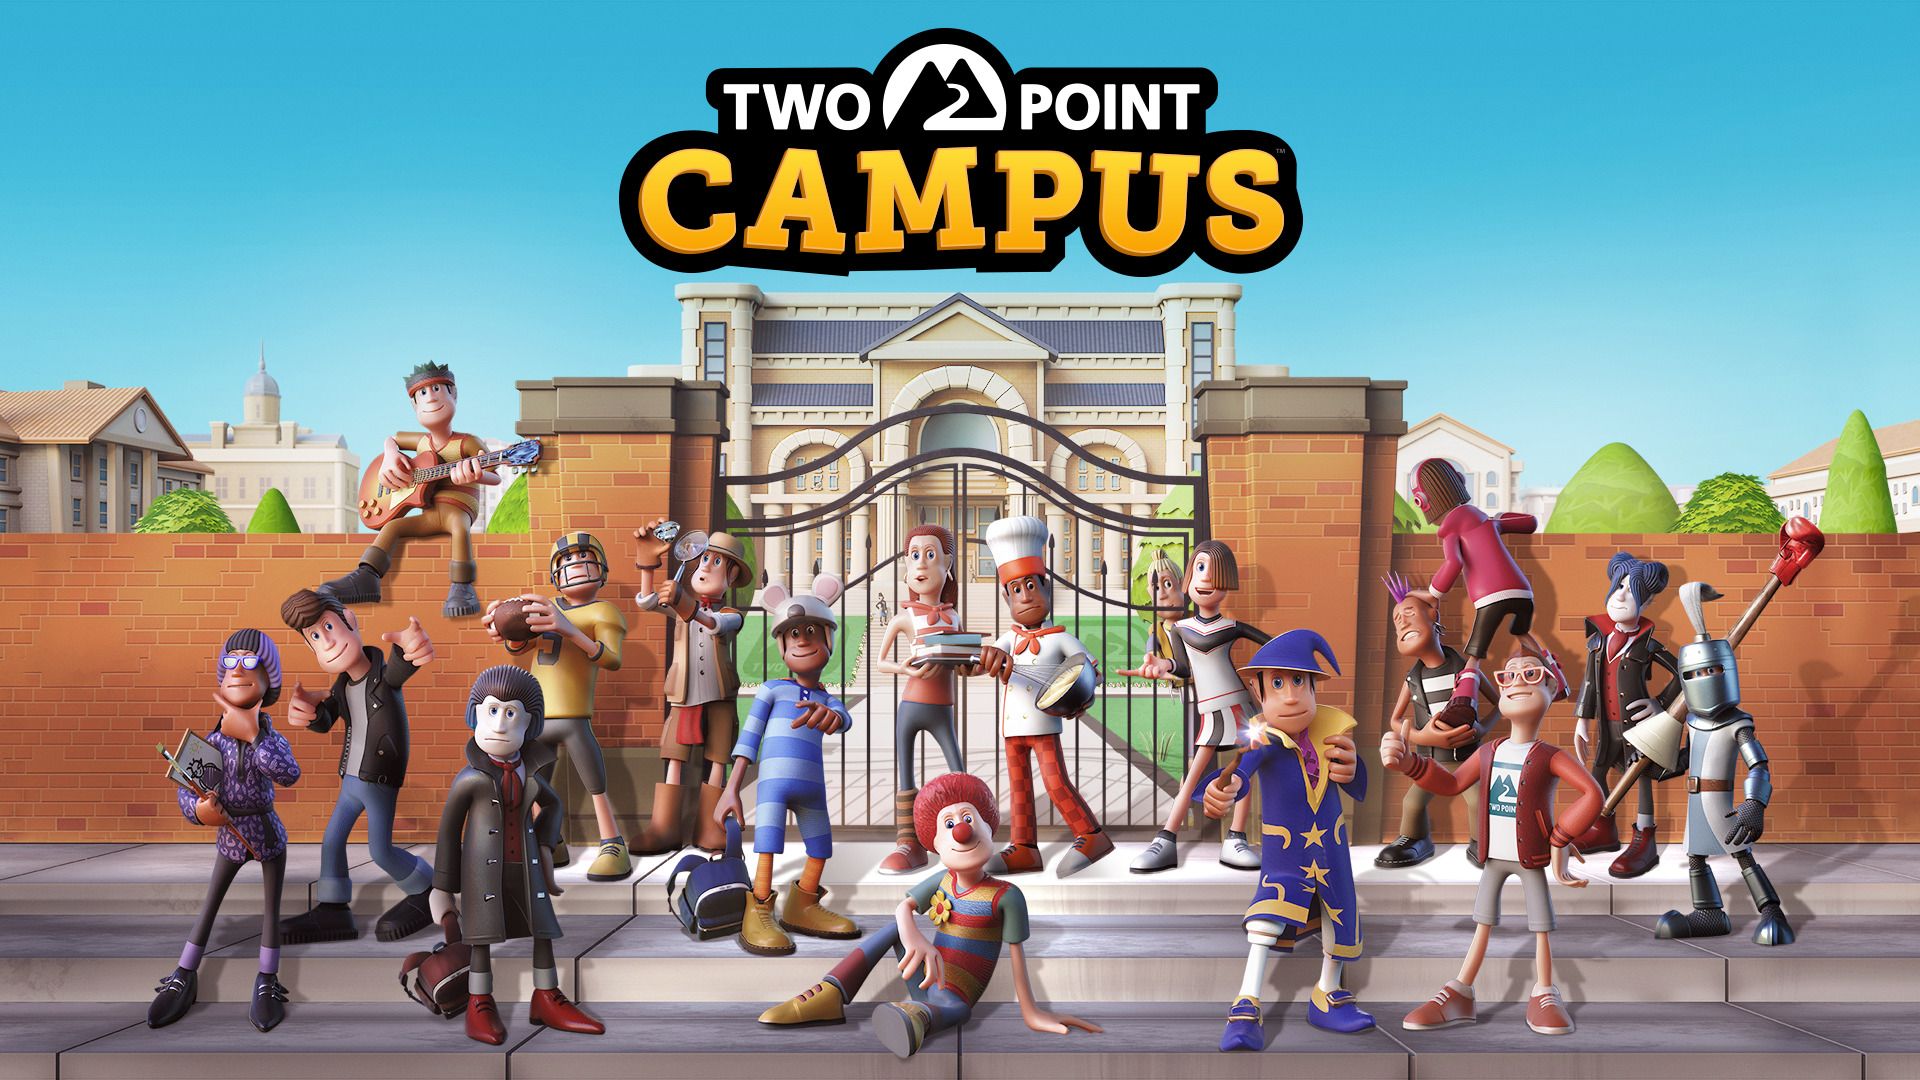 Two Point Campus key artwork of students in front of gates